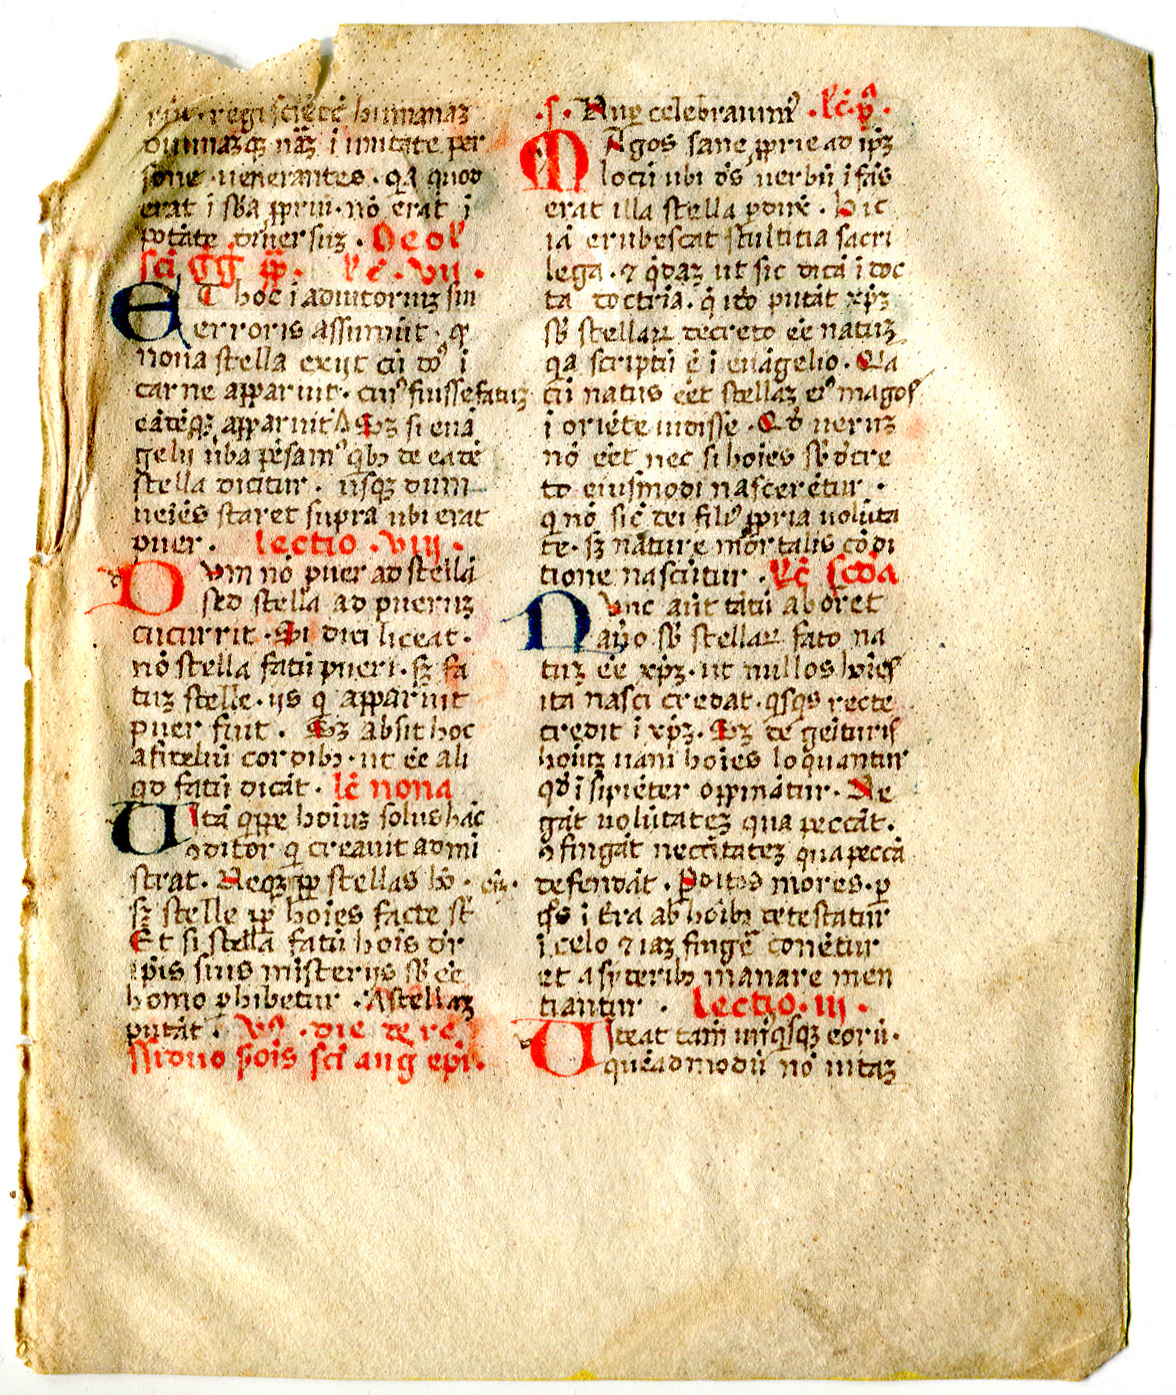 First recto of the 2 leaves with patristic lections. Reproduced by permission.